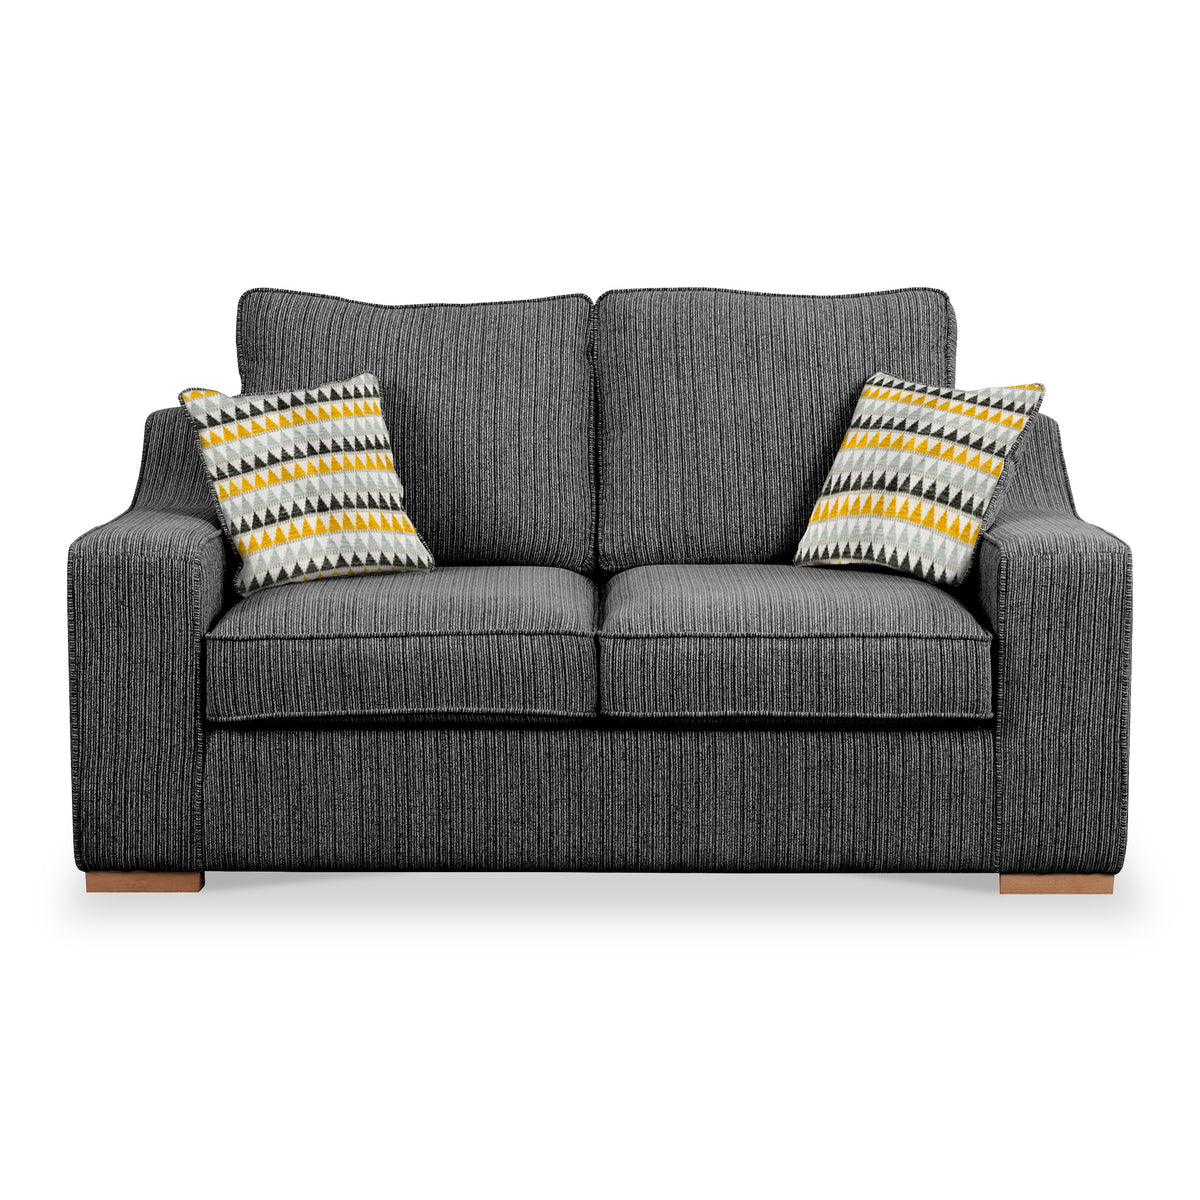 Ashow Charcoal 2 Seater Sofabed with Maika Mustard Scatter Cushions from Roseland Furniture